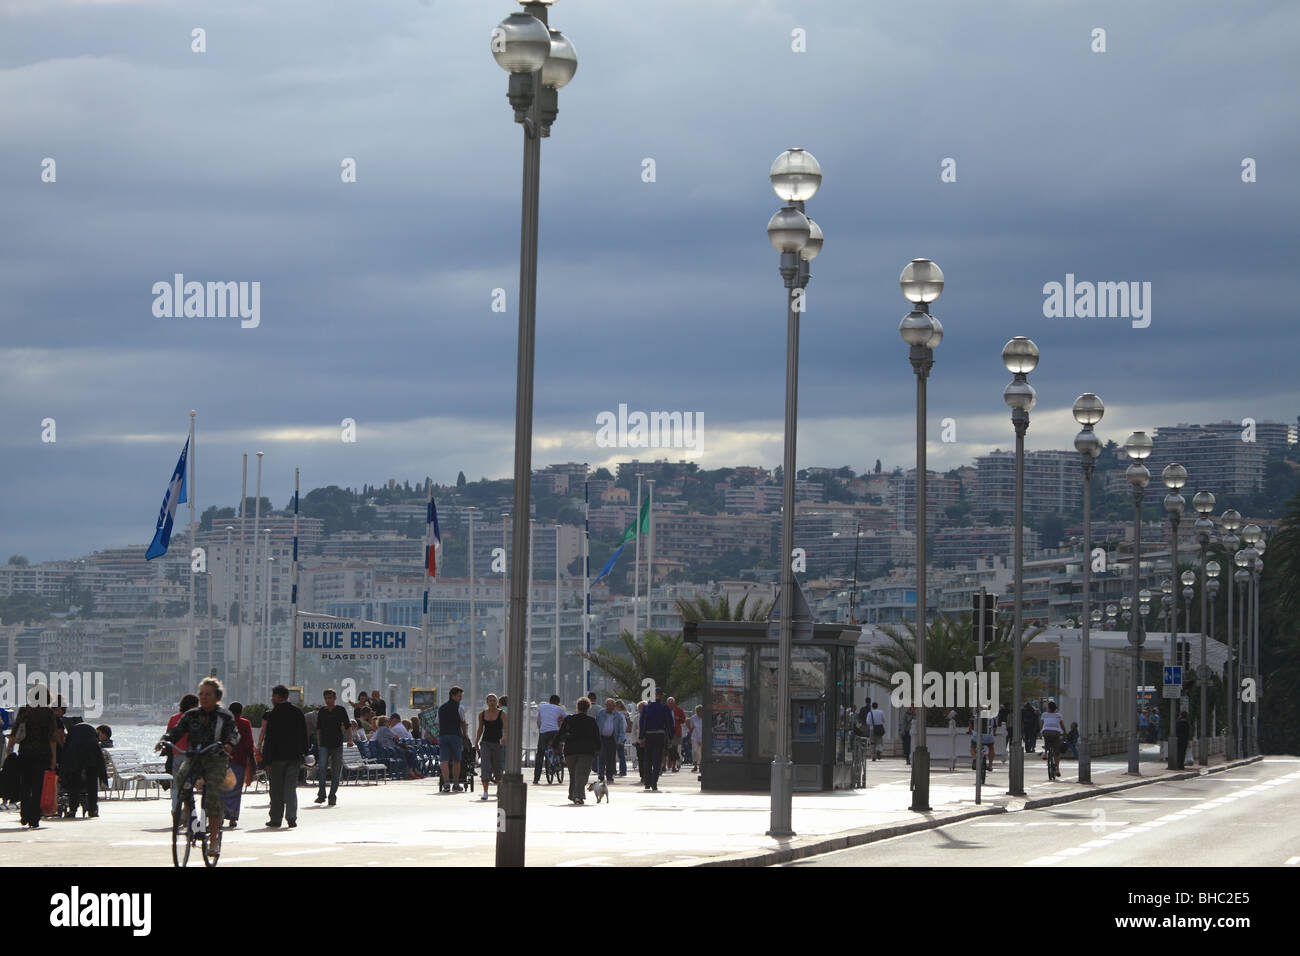 The Promenade des Anglais in Nice under a gray and cloudy sky Stock Photo